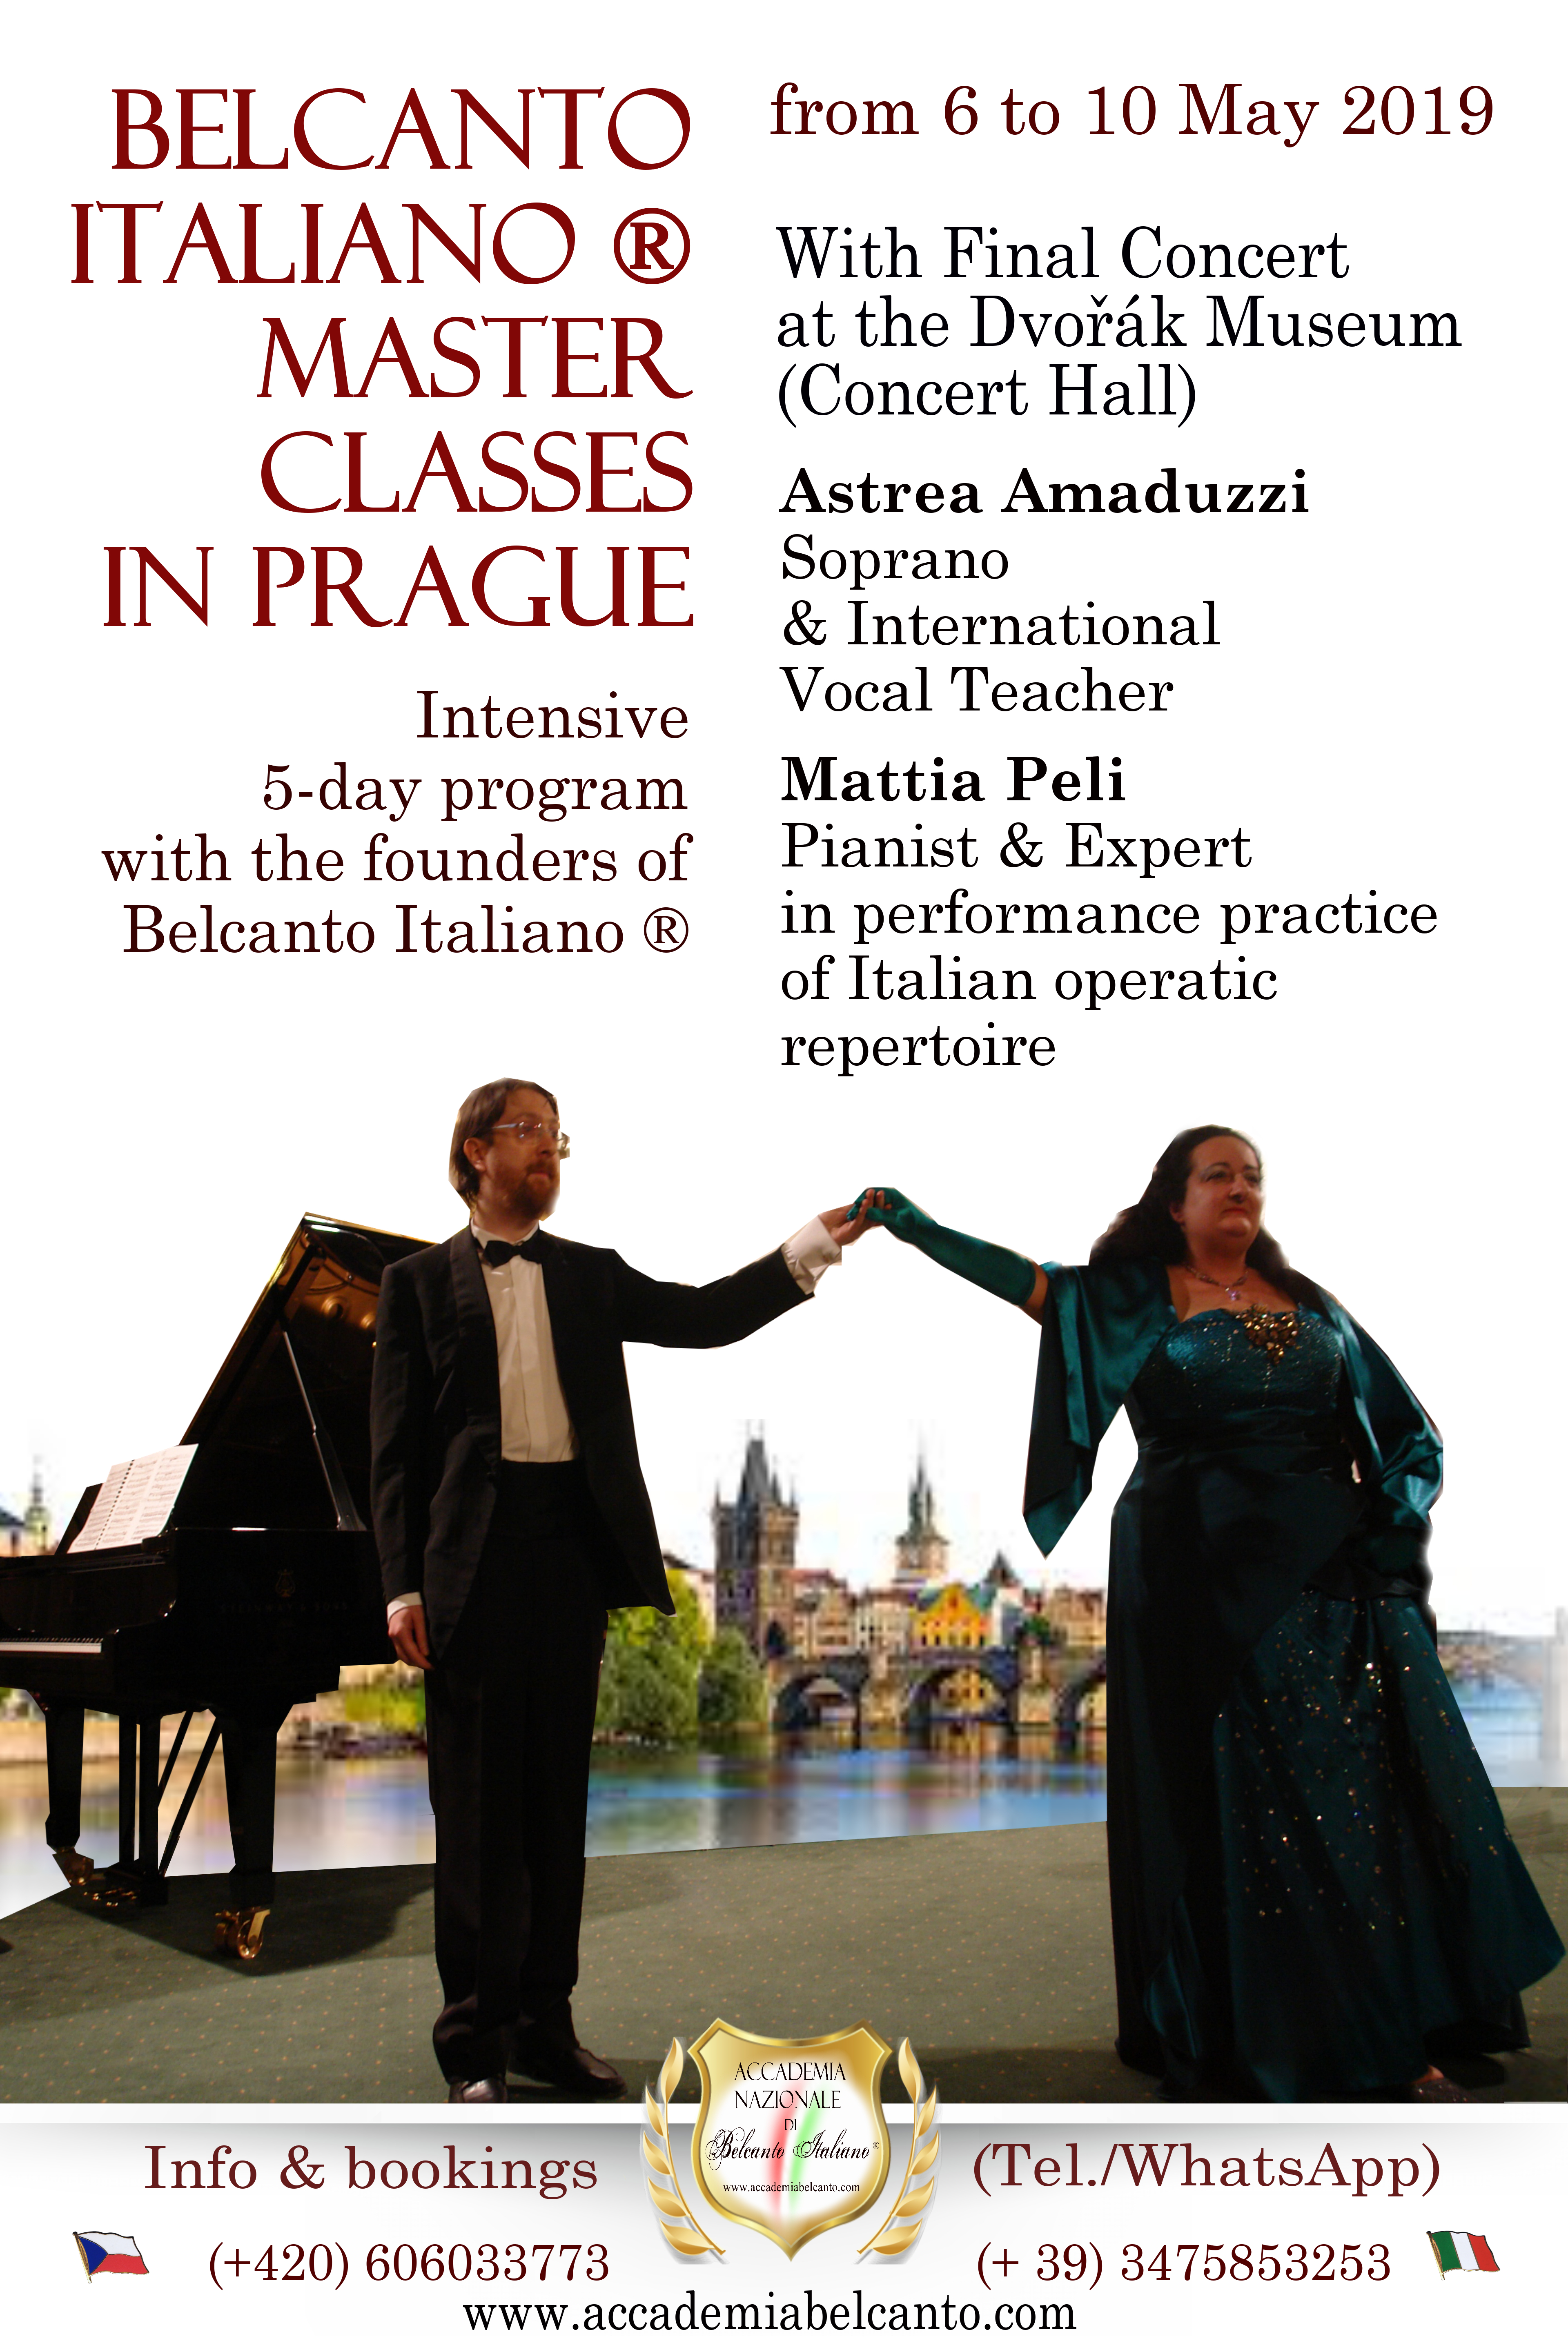 BELCANTO ITALIANO ® MASTER CLASSES IN PRAGUE – from 6 to 10 May 2019